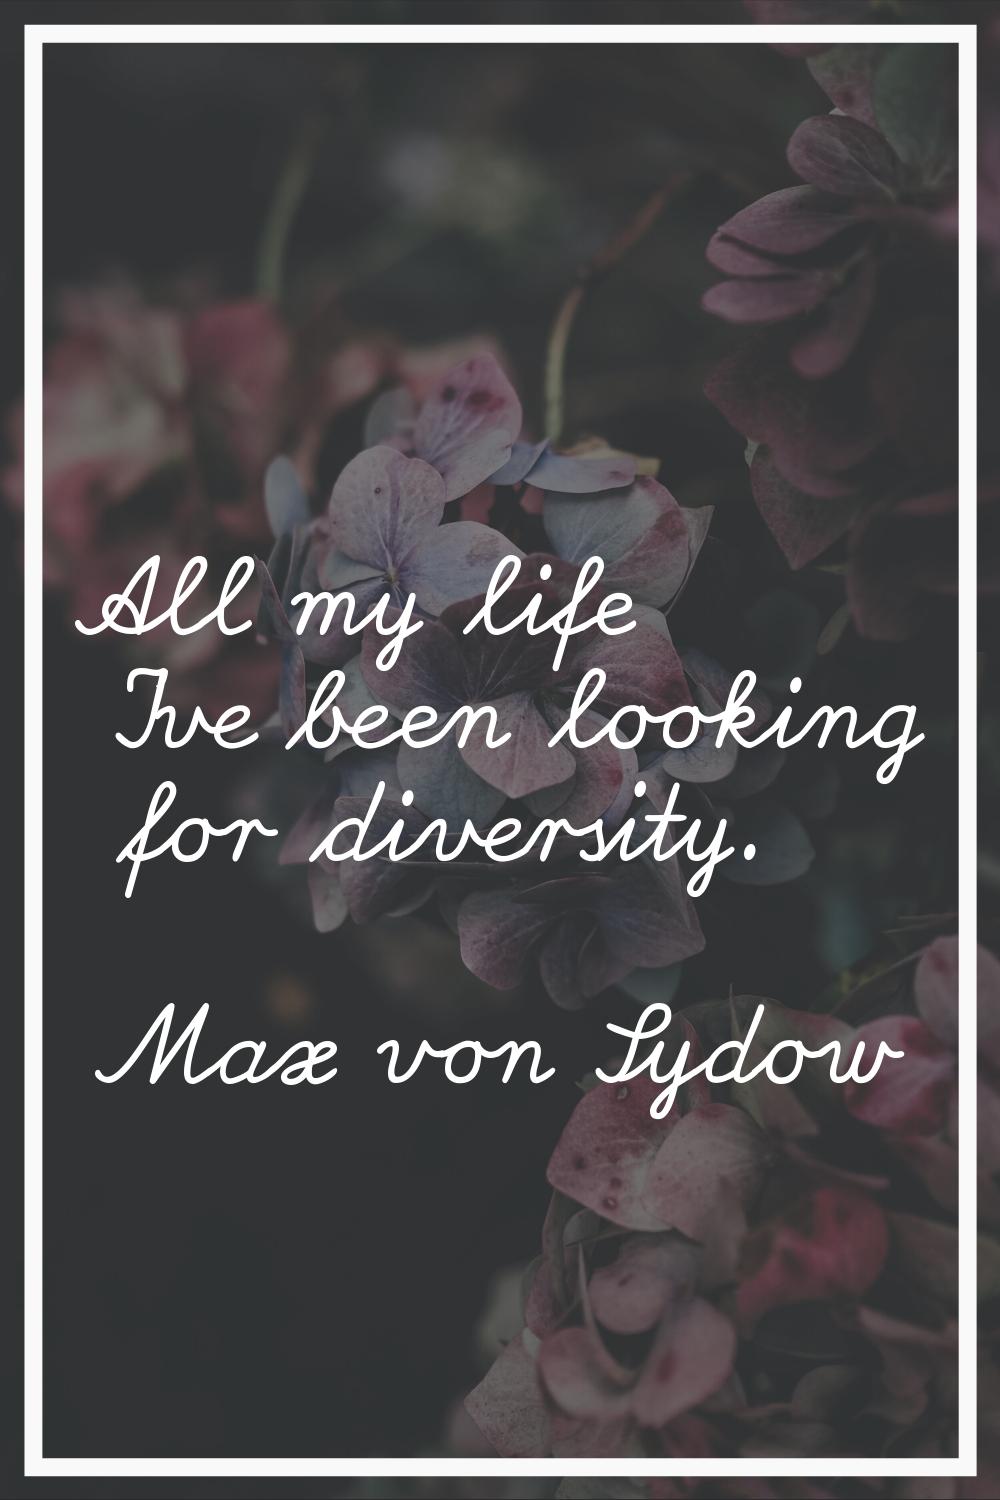 All my life I've been looking for diversity.